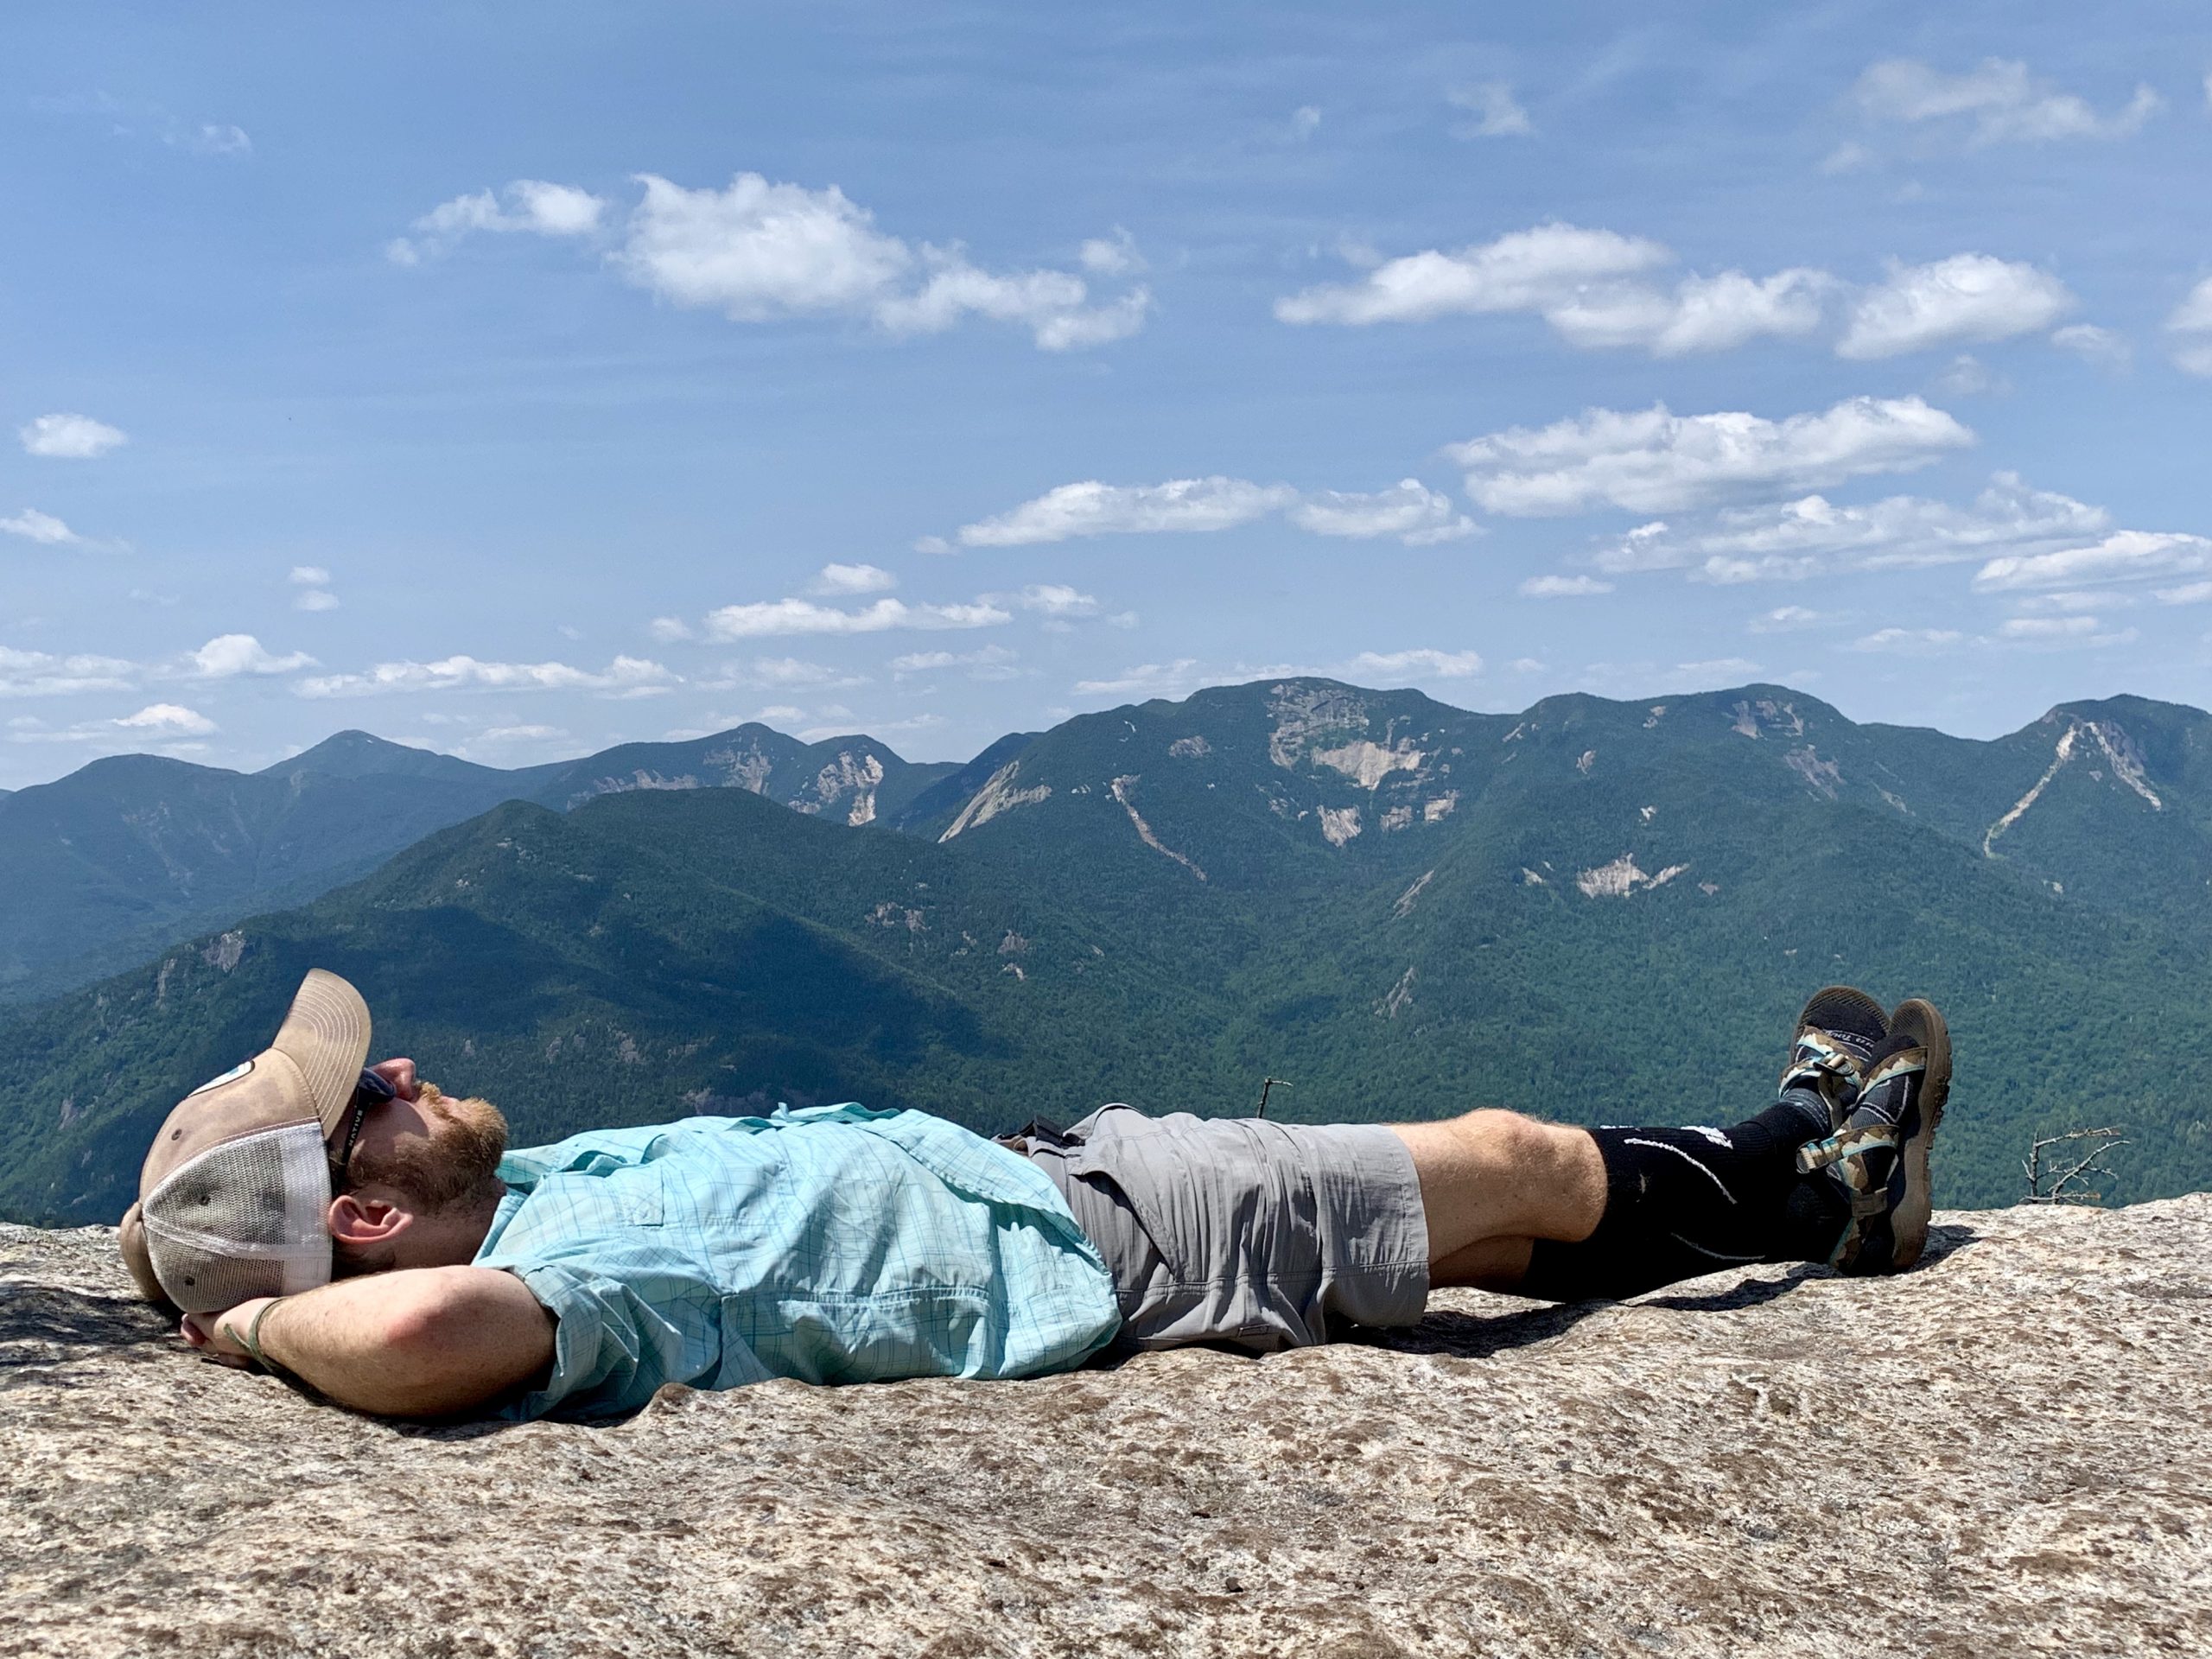 Lying on the summit of Dial Mt. with a Great Range backdrop